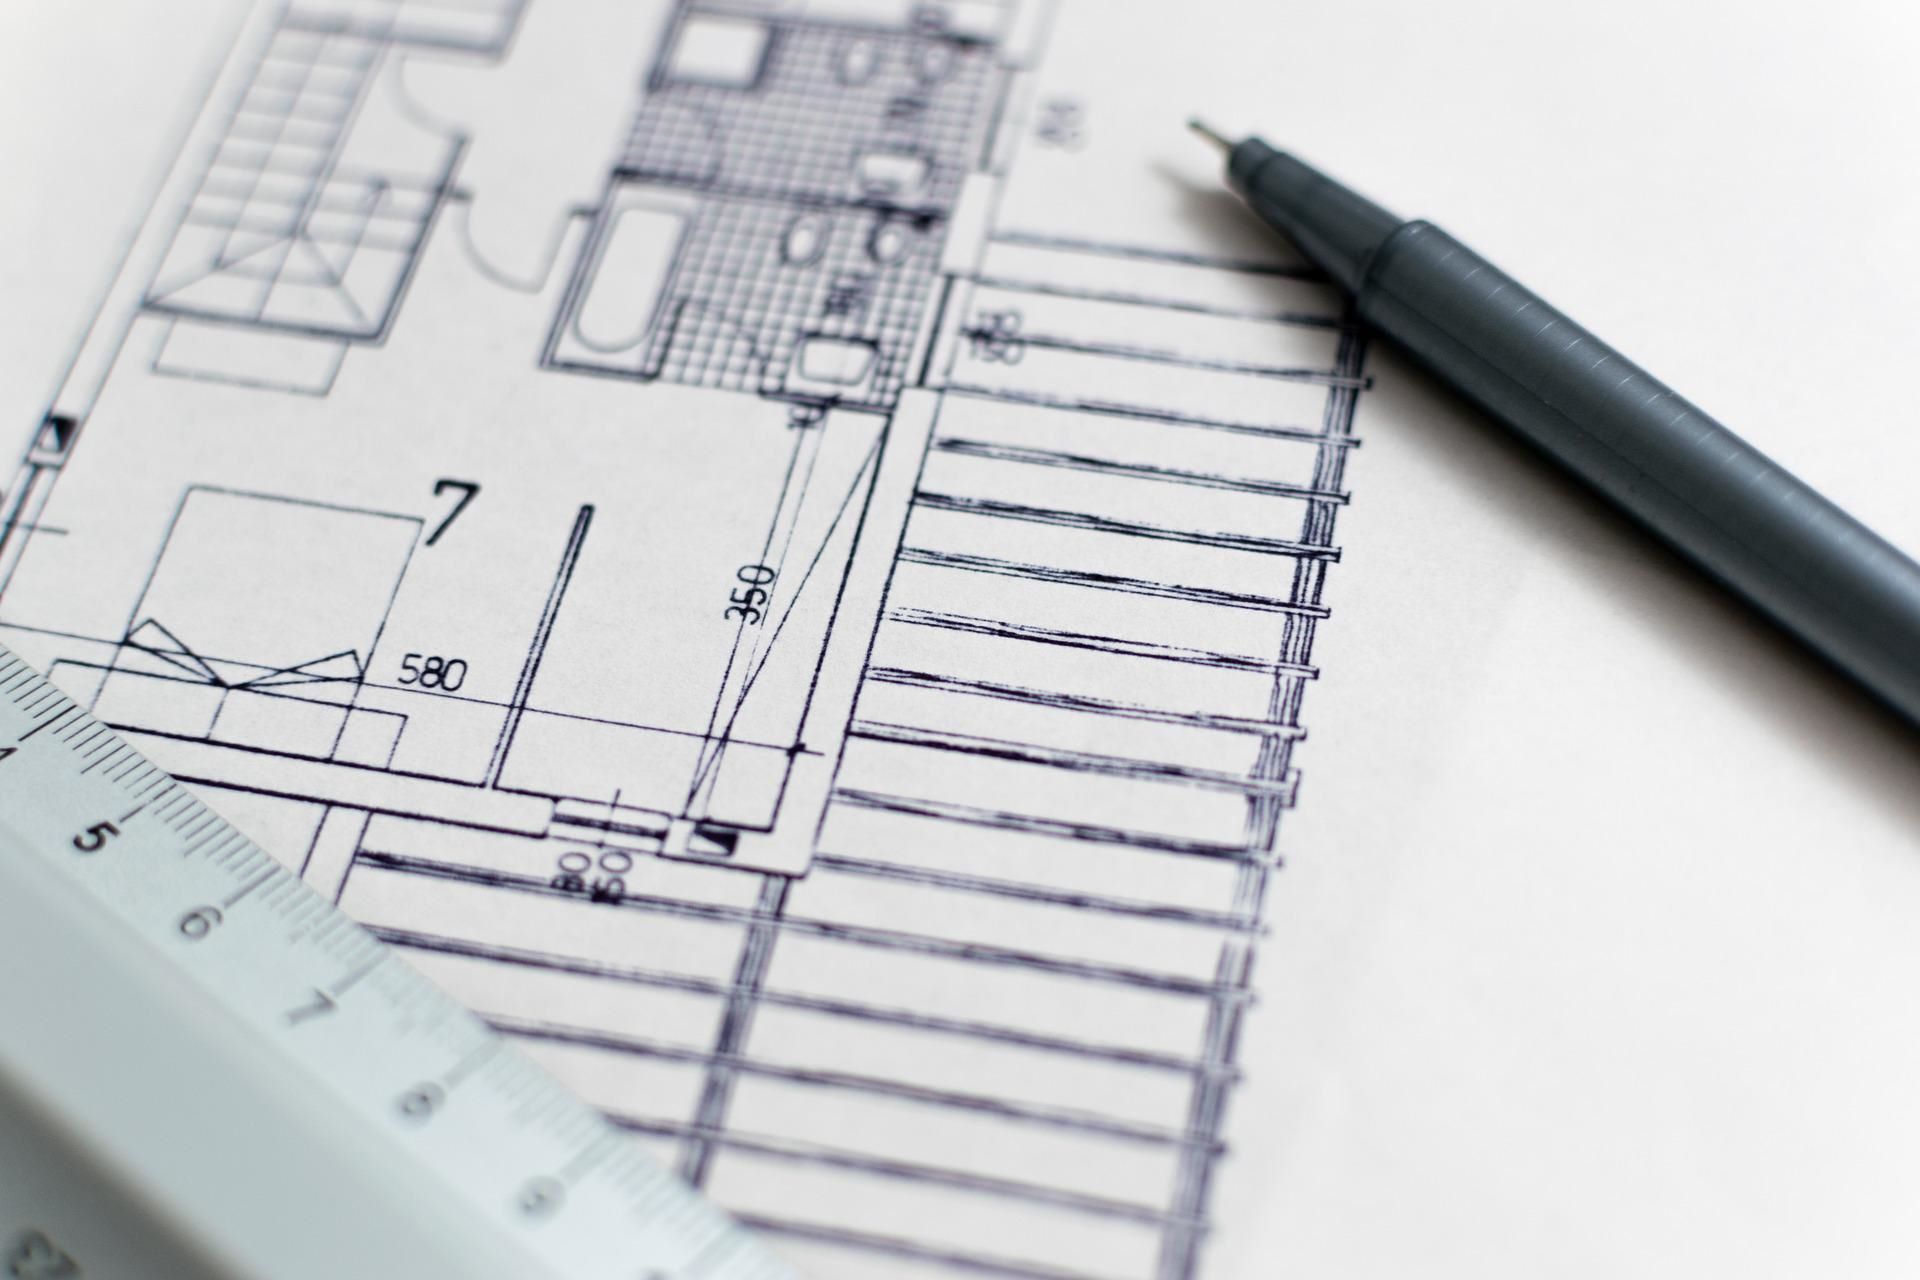 How To Design Own House Plans